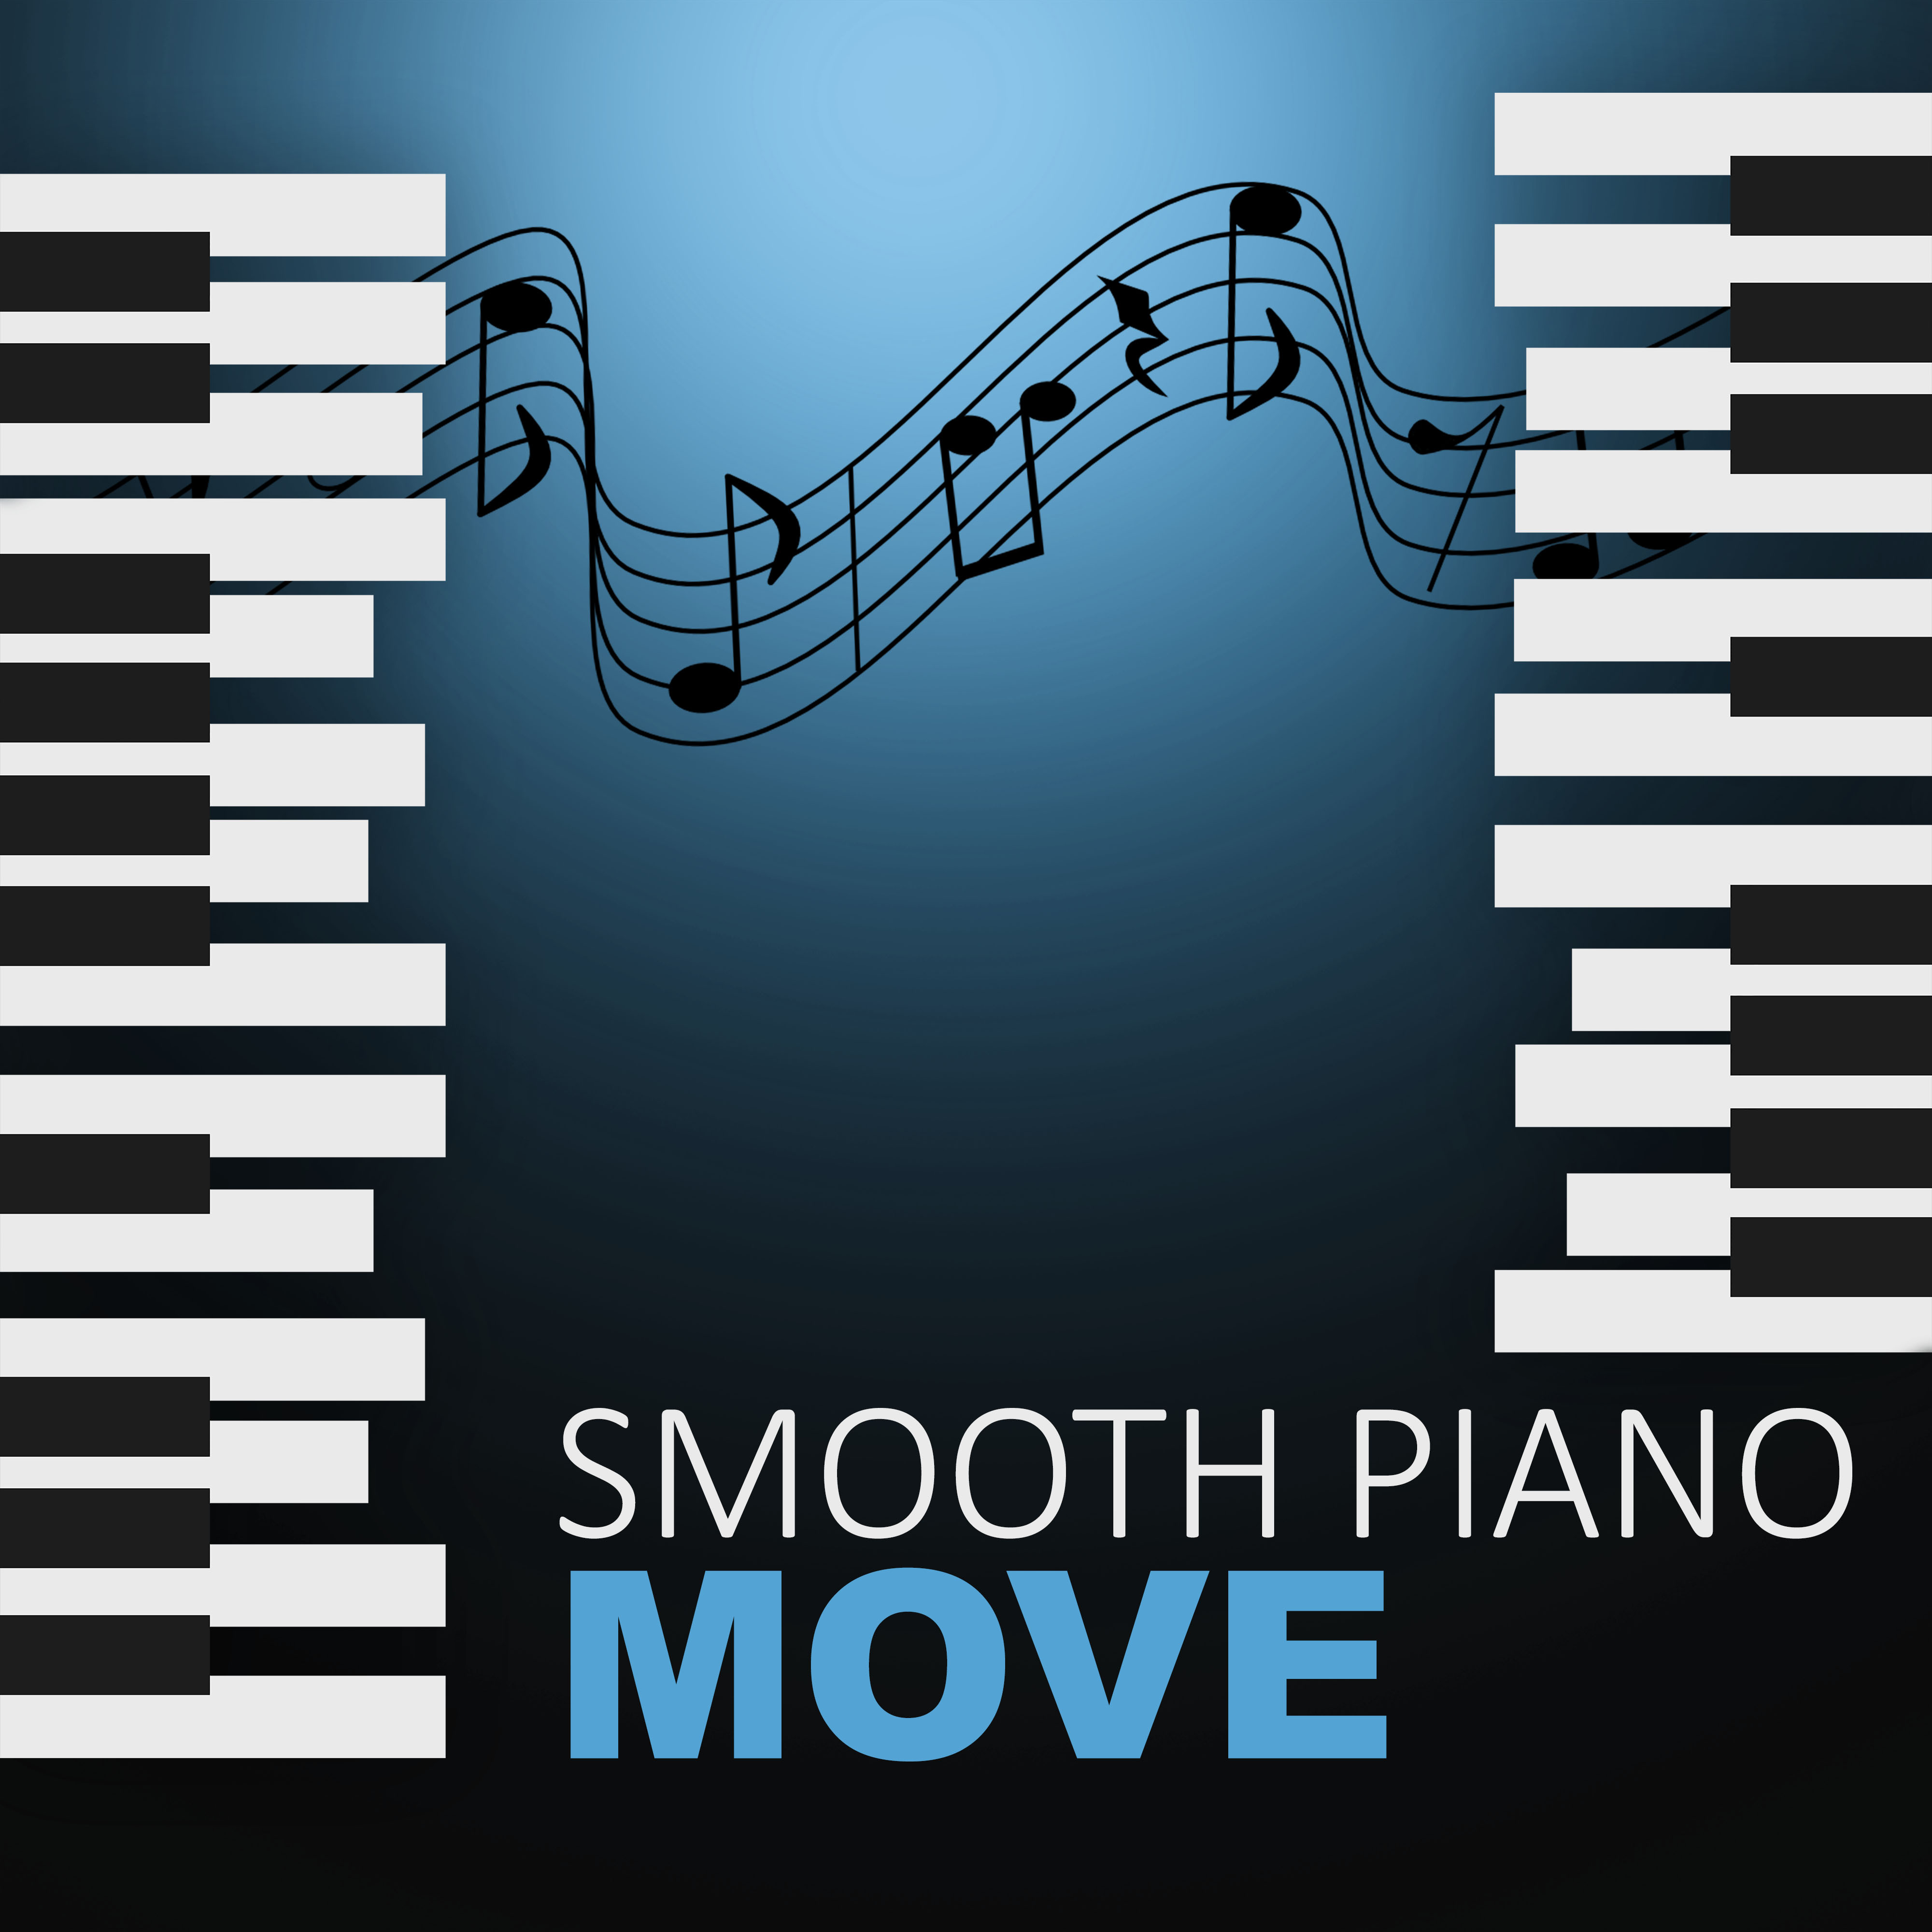 Smooth Piano Move – Soft Piano Jazz, Easy Listening, Best Collection of Jazz Music, Mellow Jazz, Calming Background Jazz